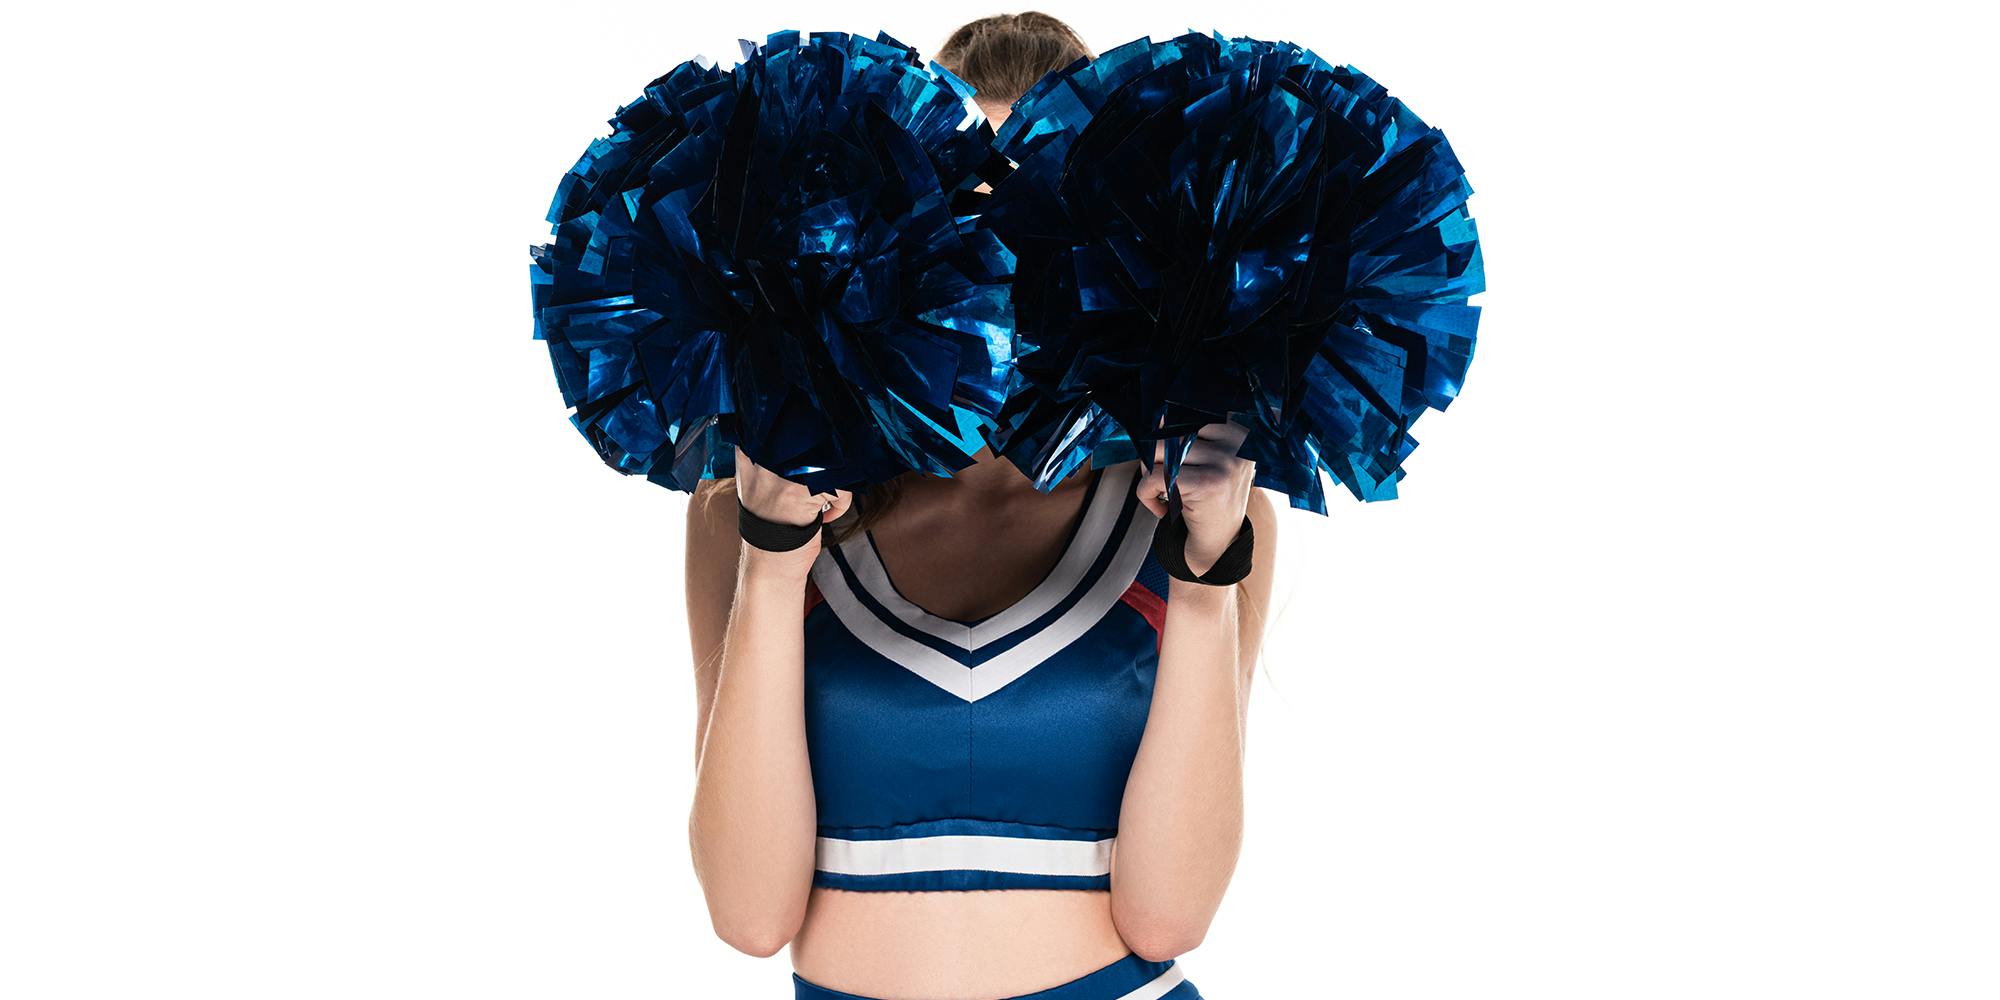 Put the pep back into your step with highly-spirited cheerleader porn